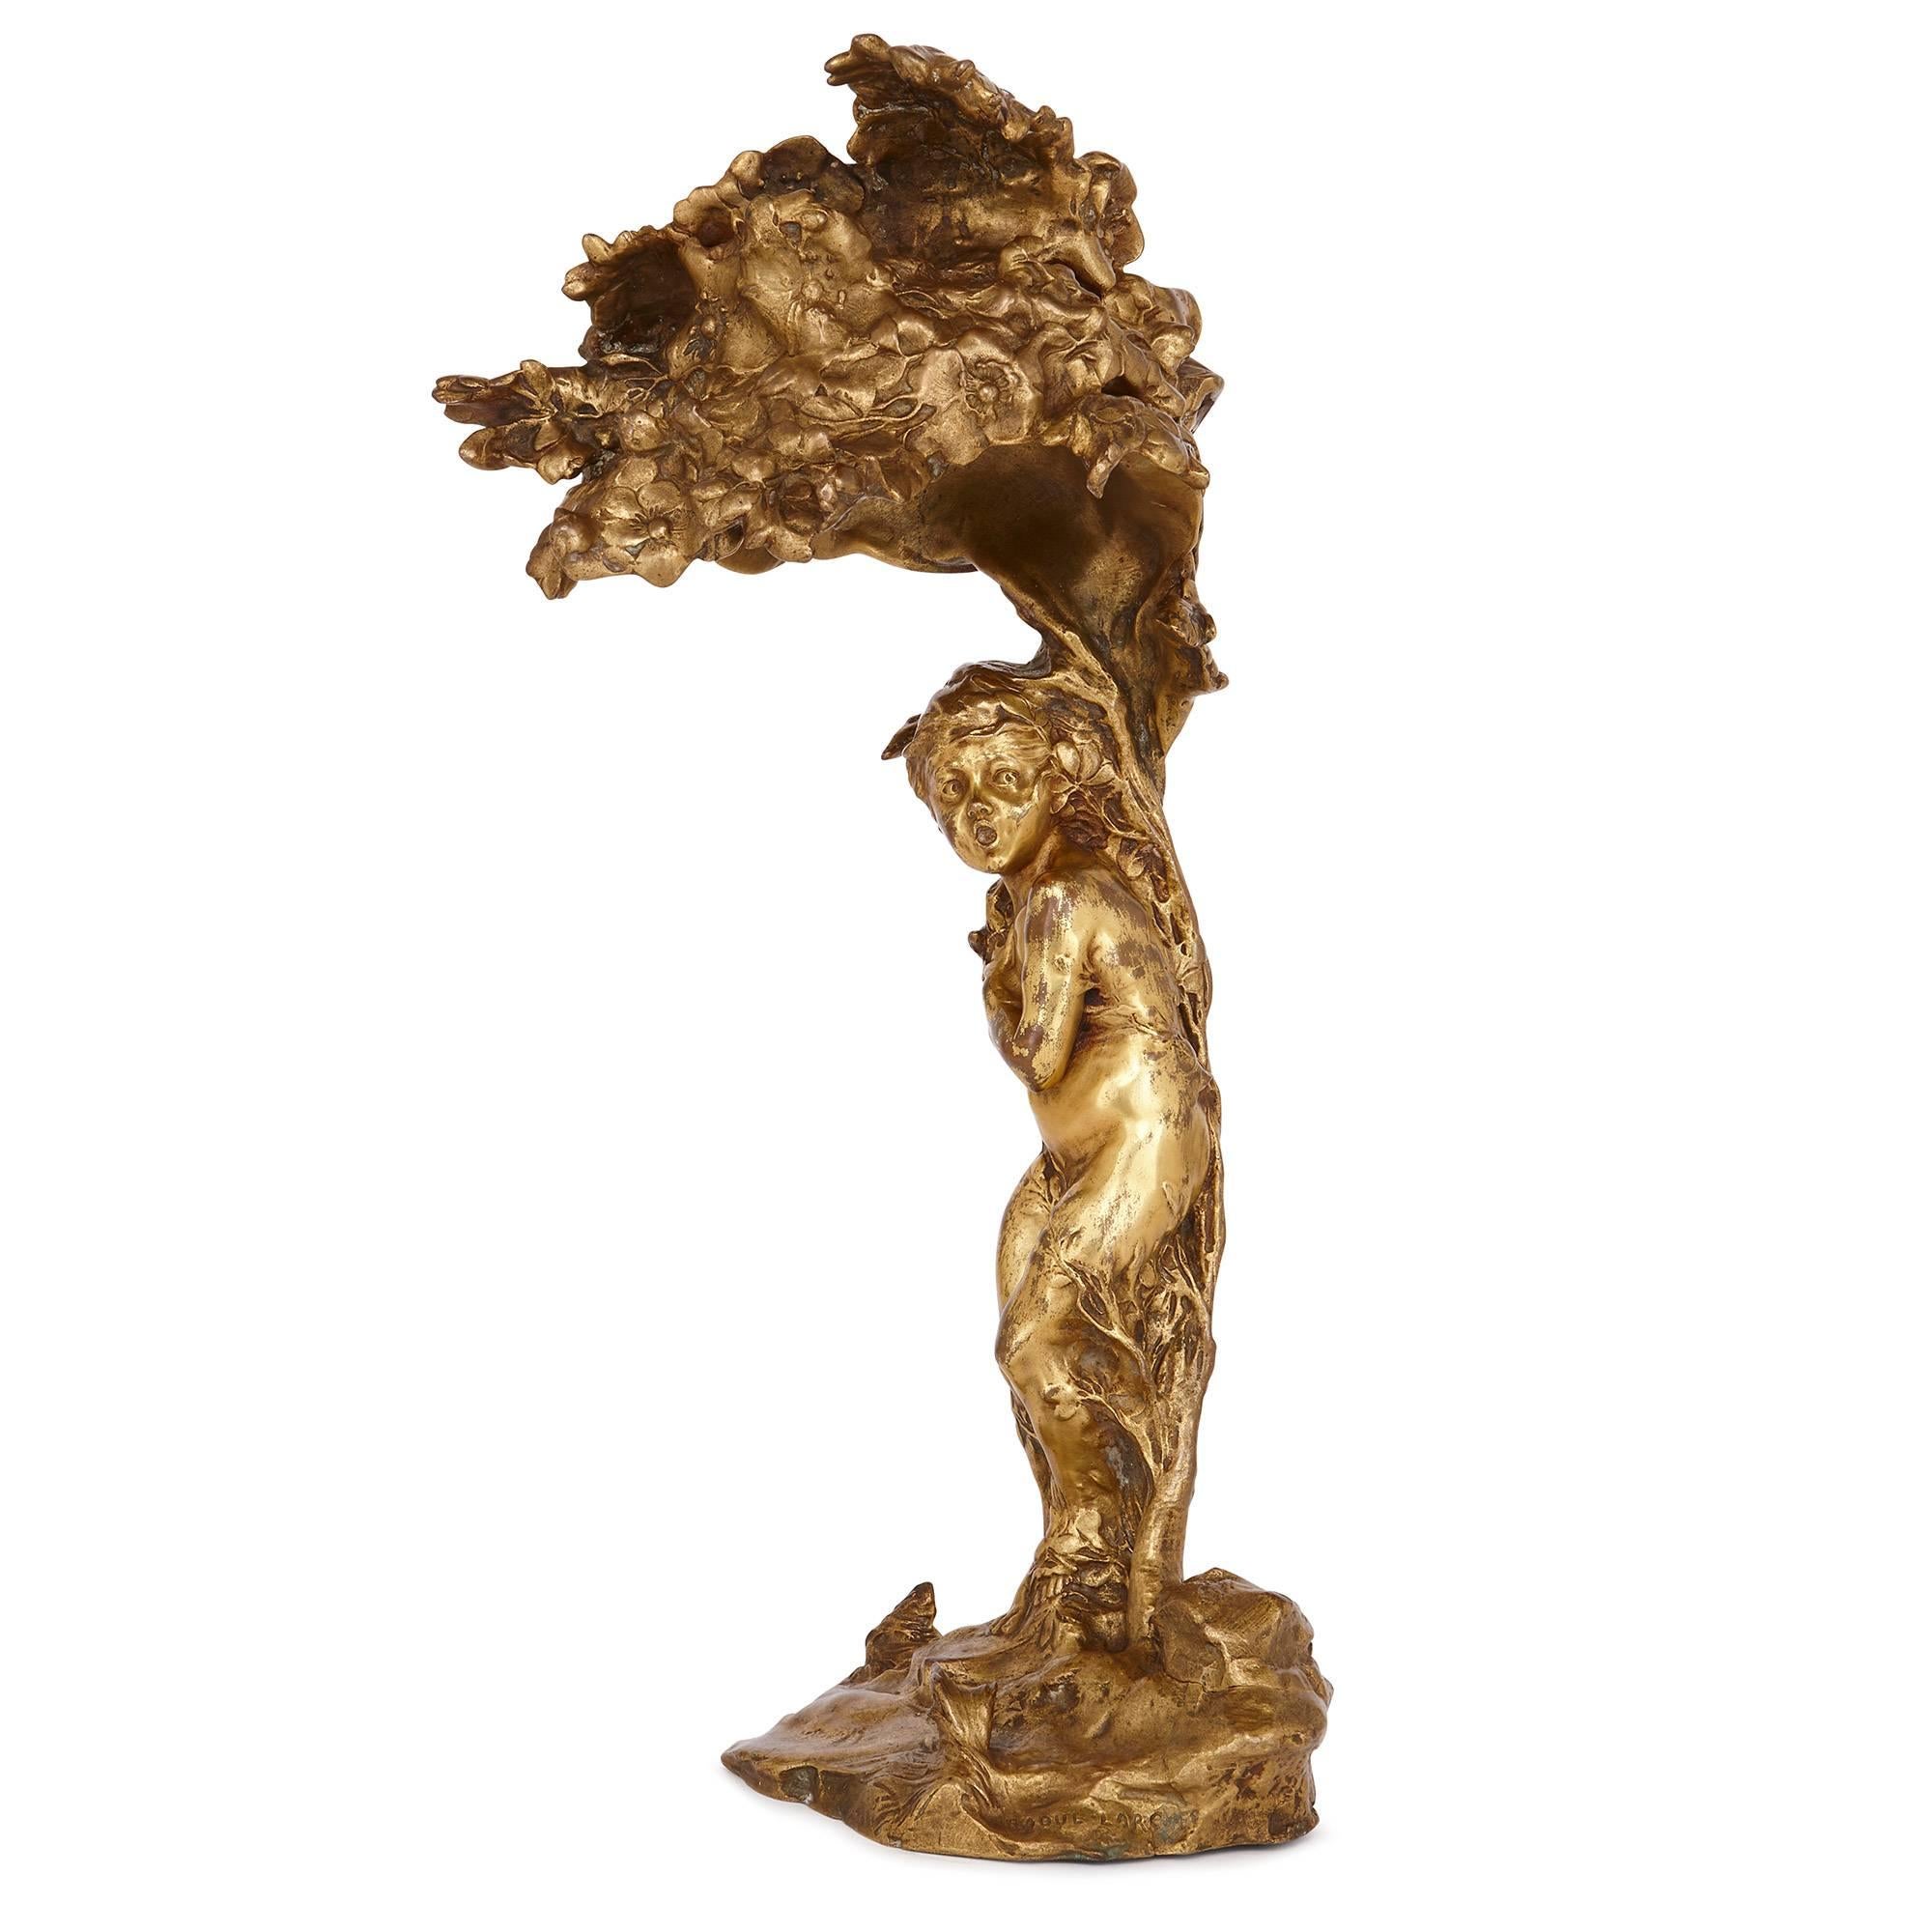 This masterfully cast ormolu table lamp is by Raoul Larche (French, 1860-1912) who was a famous sculpture of the early 20th century. Larche was celebrated for his sculptures of nude women in the Art Nouveau style.
The table lamp, titled 'Le Coup de